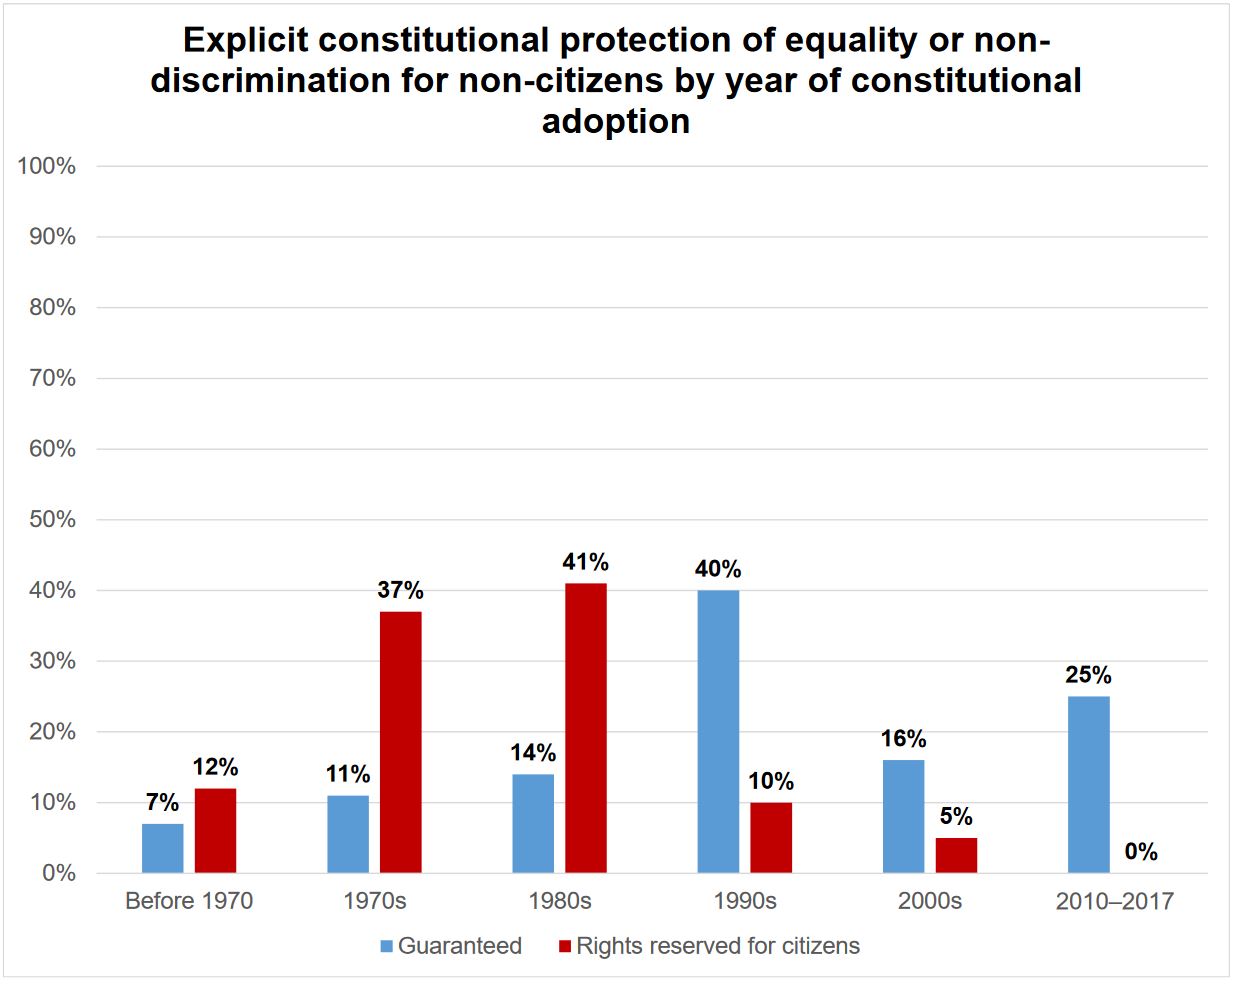 Chart: Explicit constitutional protection of equality for non-citizens